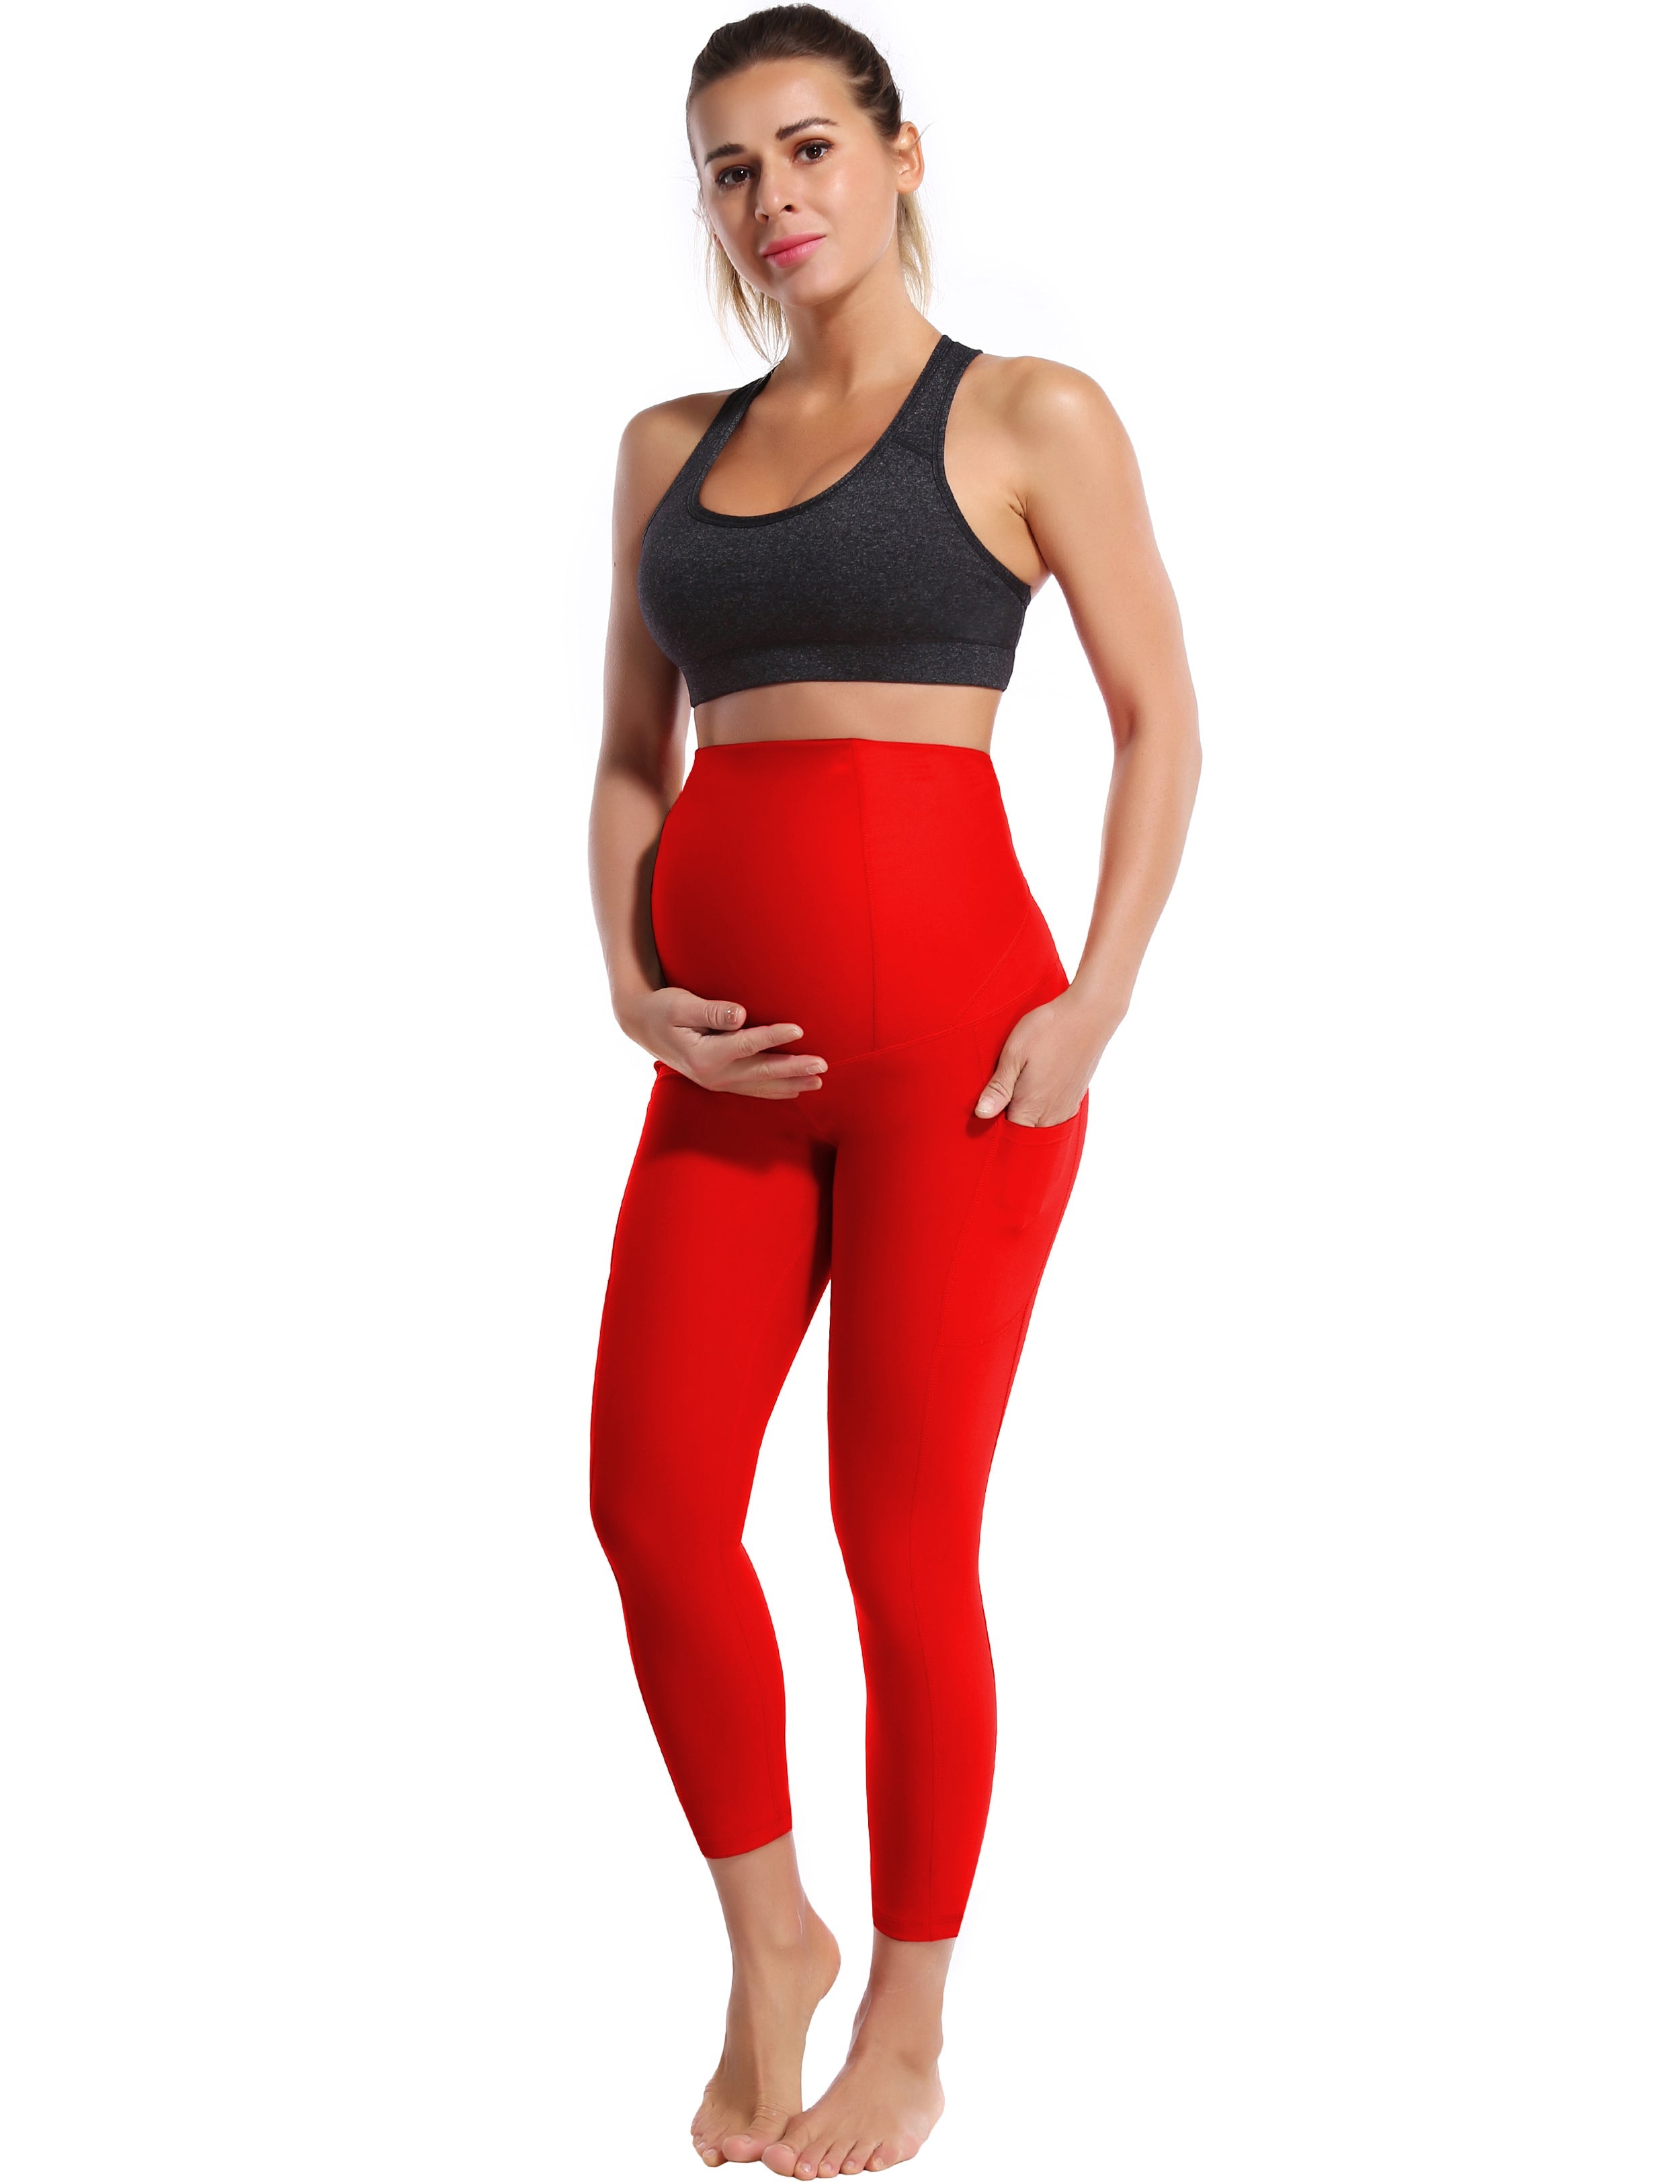 22" Side Pockets Maternity Jogging Pants scarlet 87%Nylon/13%Spandex Softest-ever fabric High elasticity 4-way stretch Fabric doesn't attract lint easily No see-through Moisture-wicking Machine wash